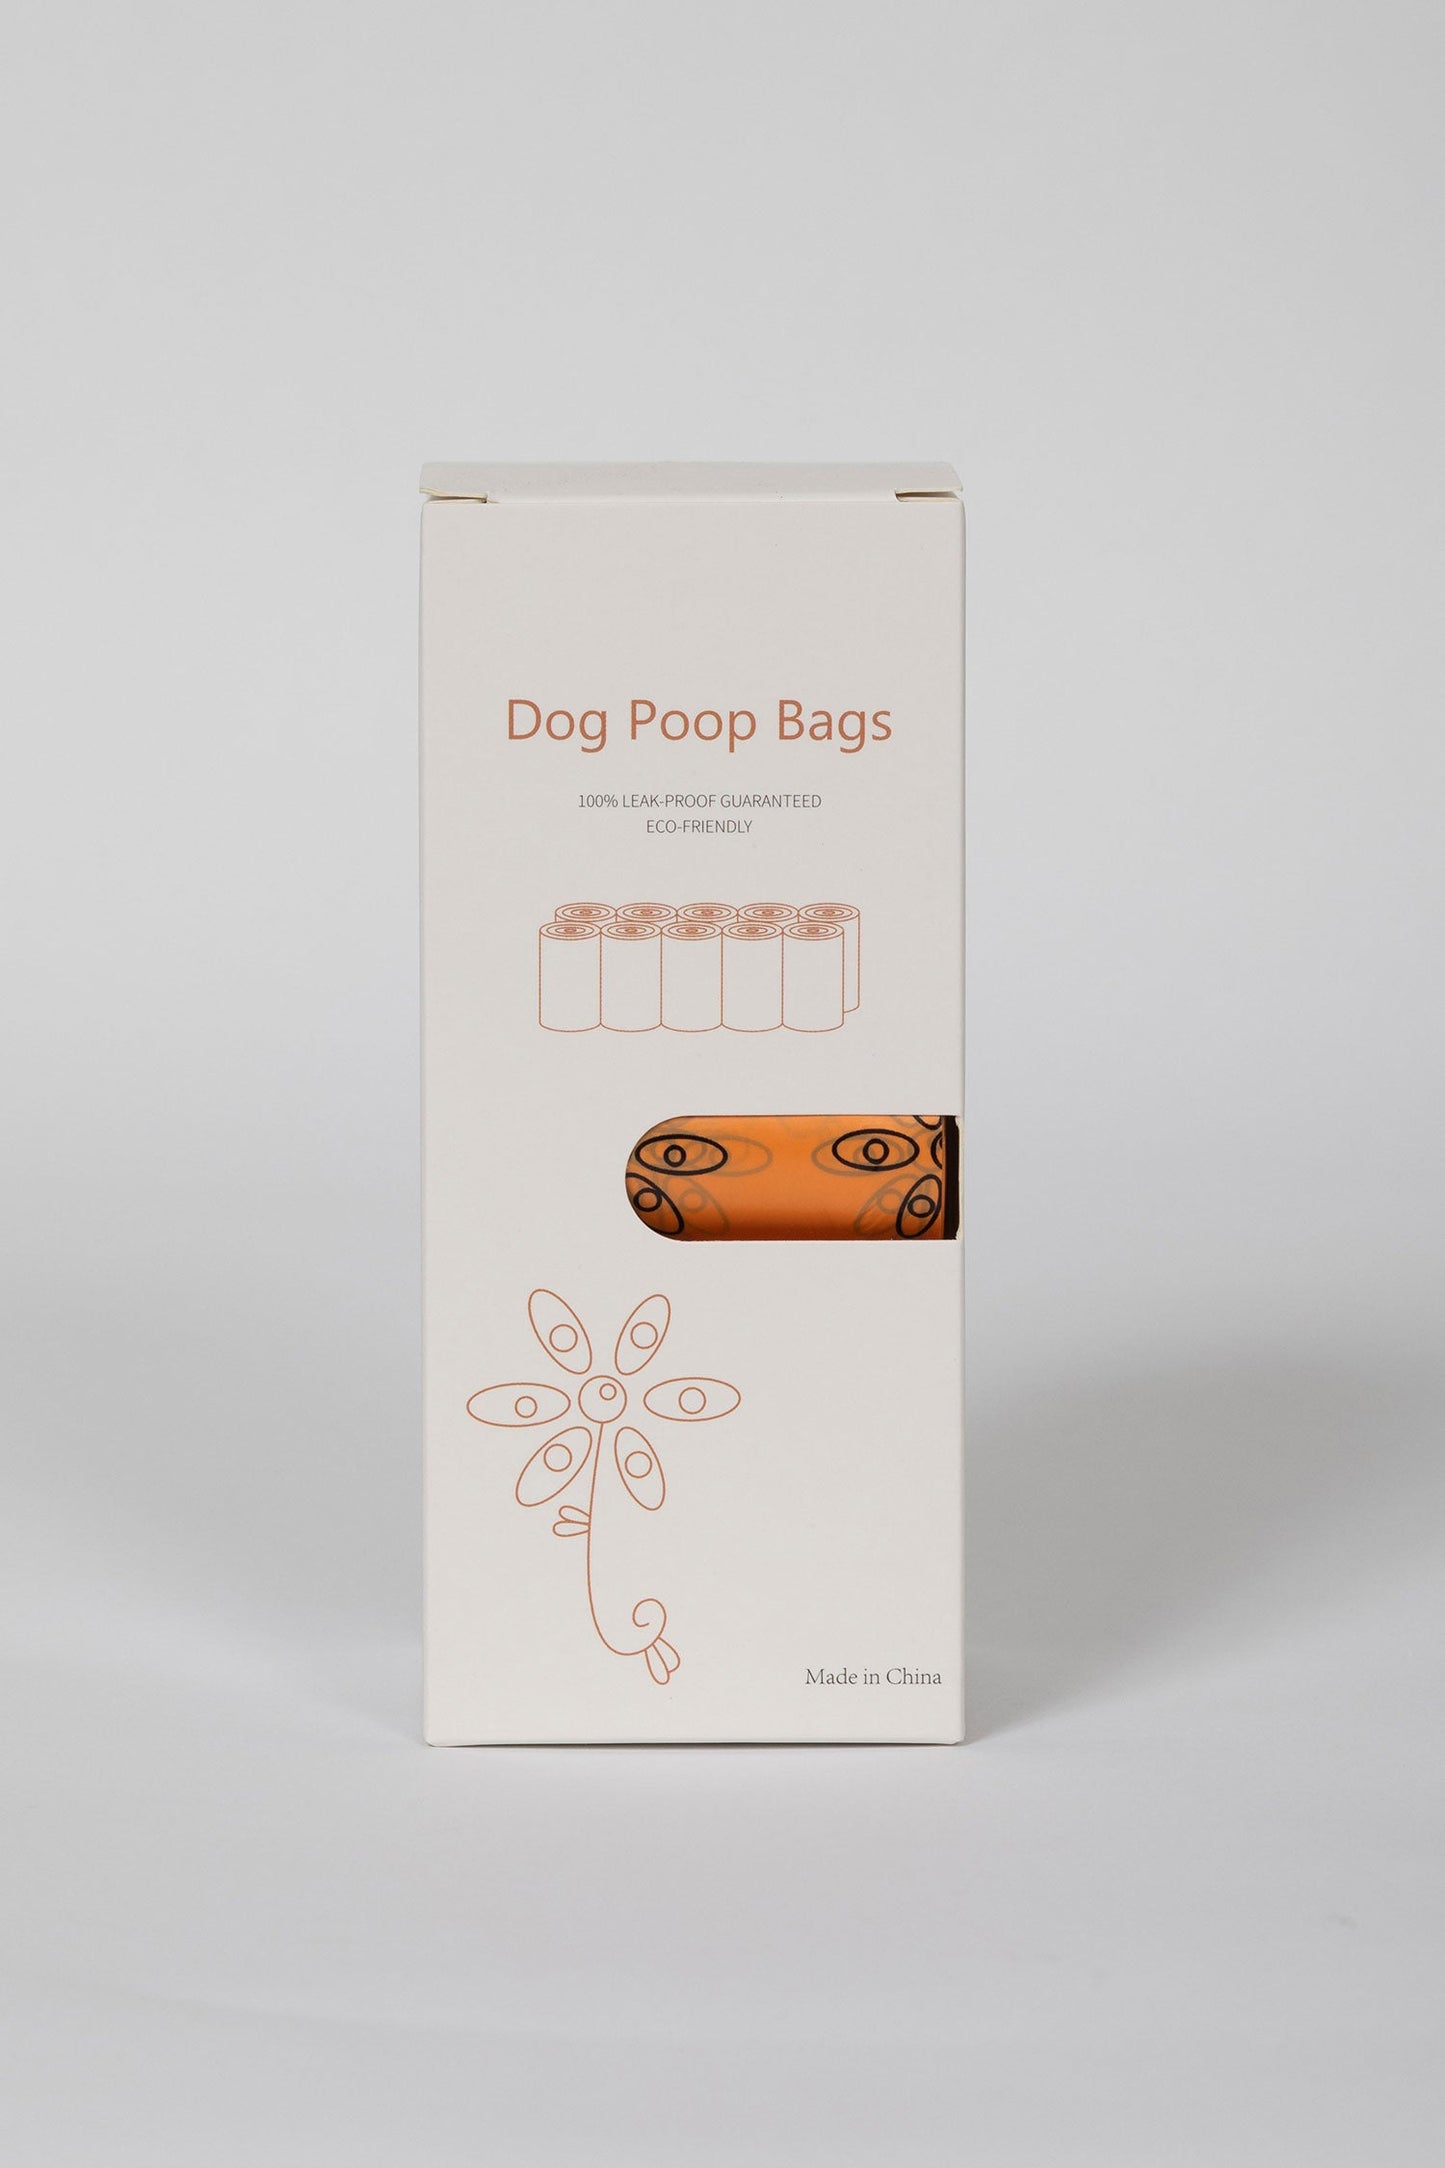 Daisys poop bags